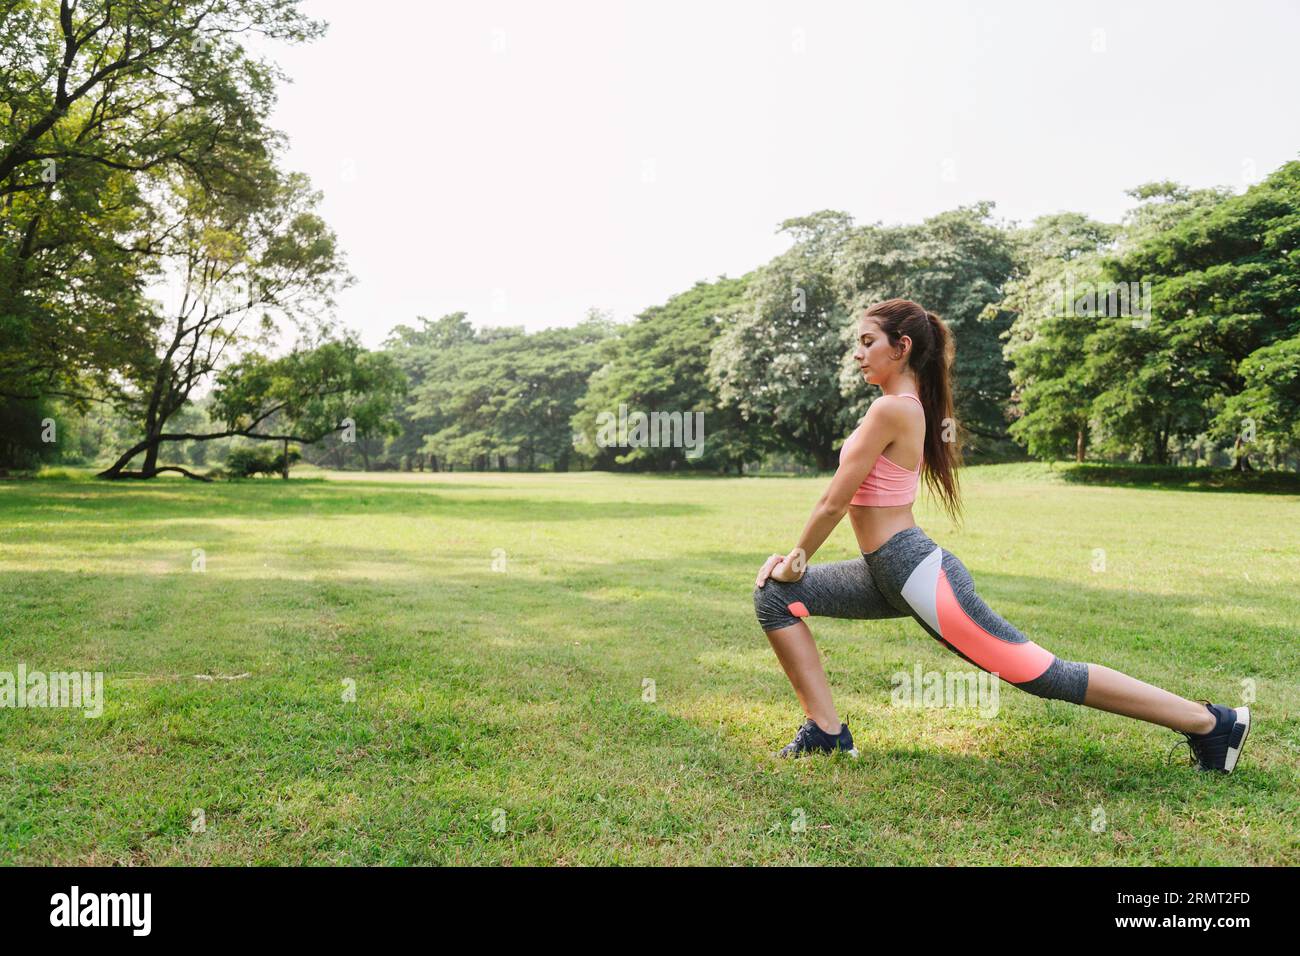 sports woman working out and stretching warm up leg muscle before outdoor running exercise in city park. outdoor fitness. Stock Photo